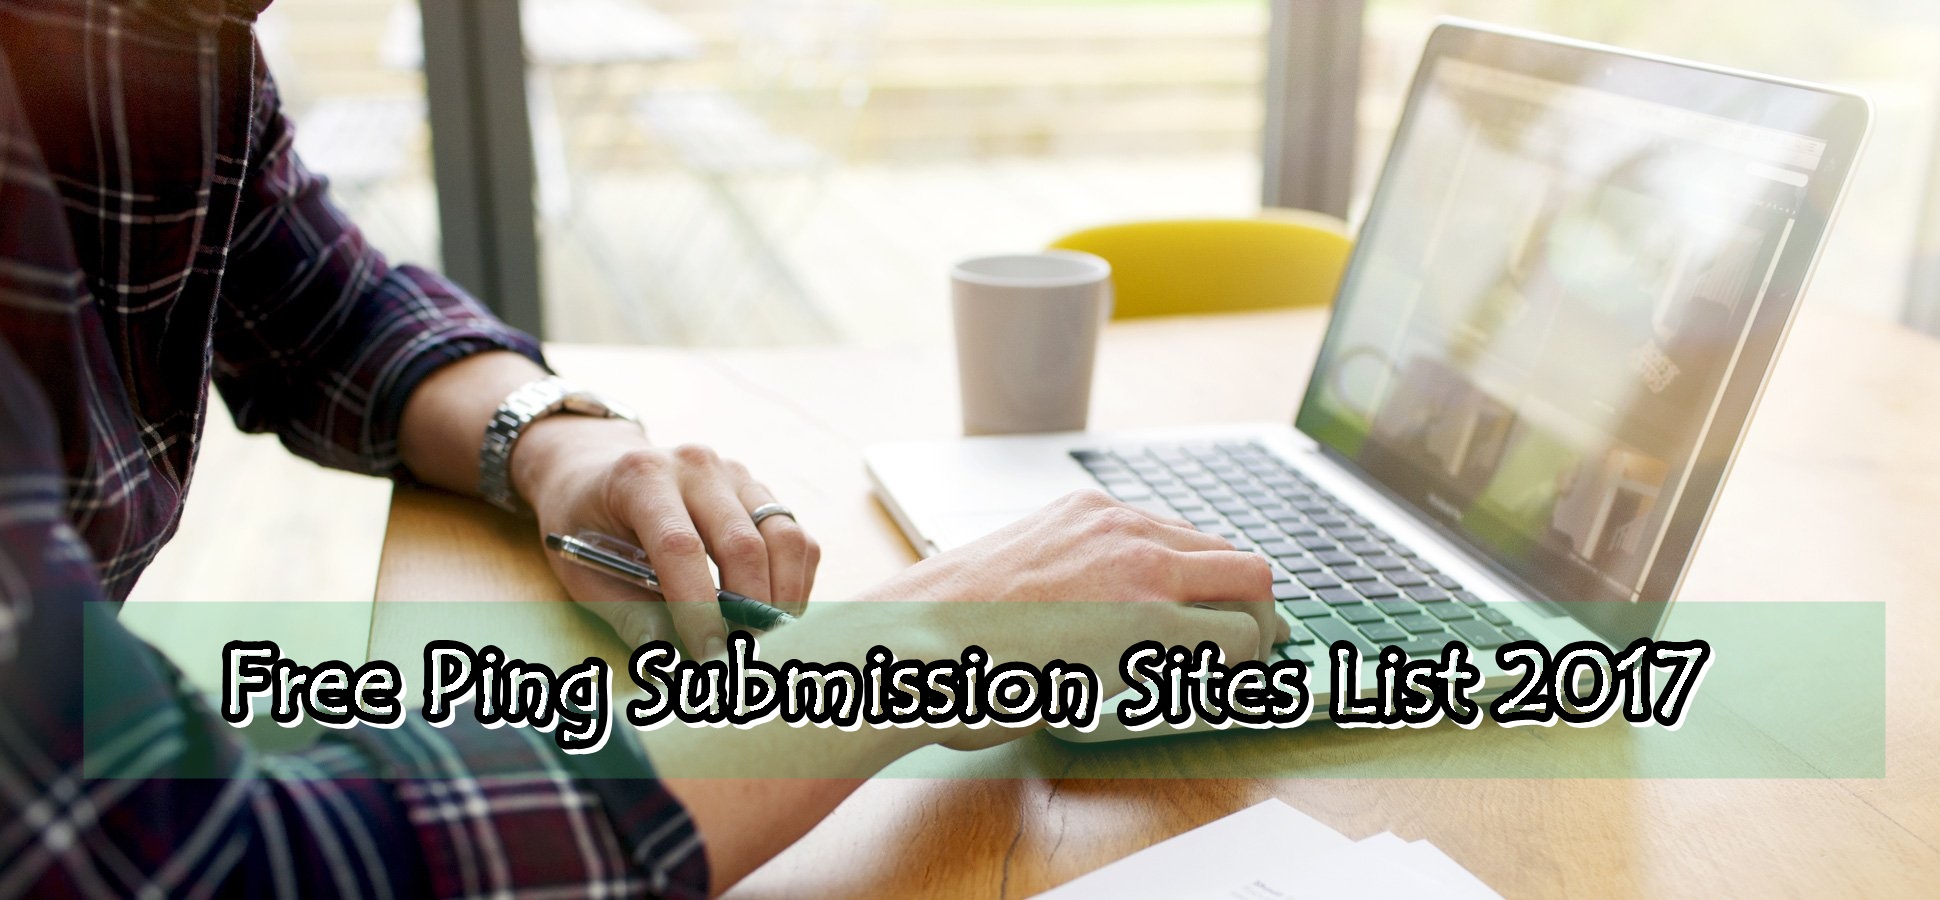 Free Ping Submission Sites List 2017